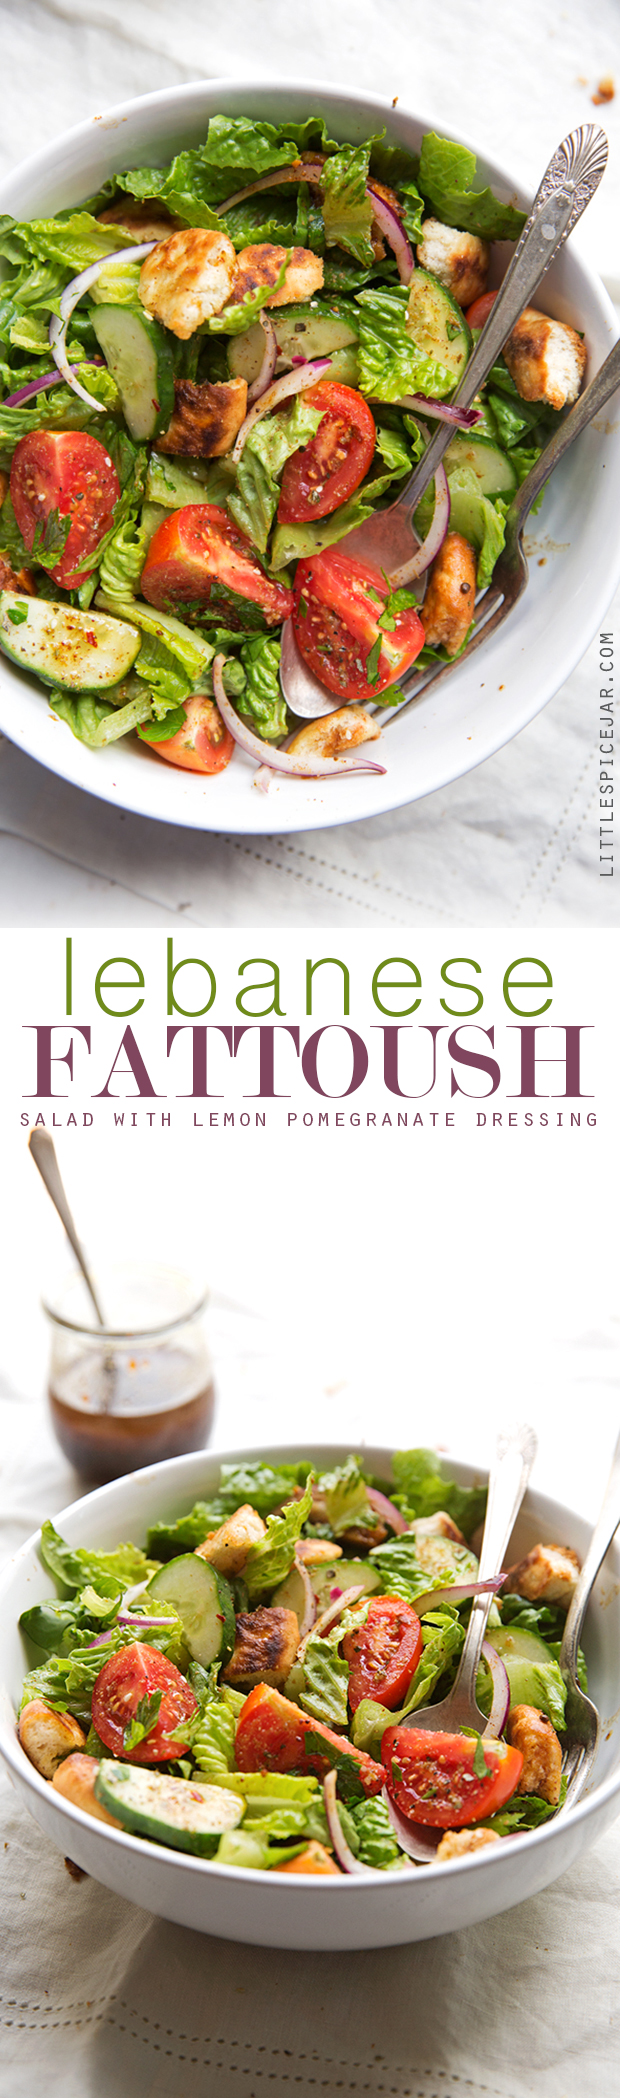 Lebanese Fattoush Salad with Lemon Pomegranate Dressing - This salad is bold and flavorful topped with homemade pita chips and a zippy middle eastern style dressing #fattoush #fattoushsalad #lebanese #salad | Littlespicejar.com